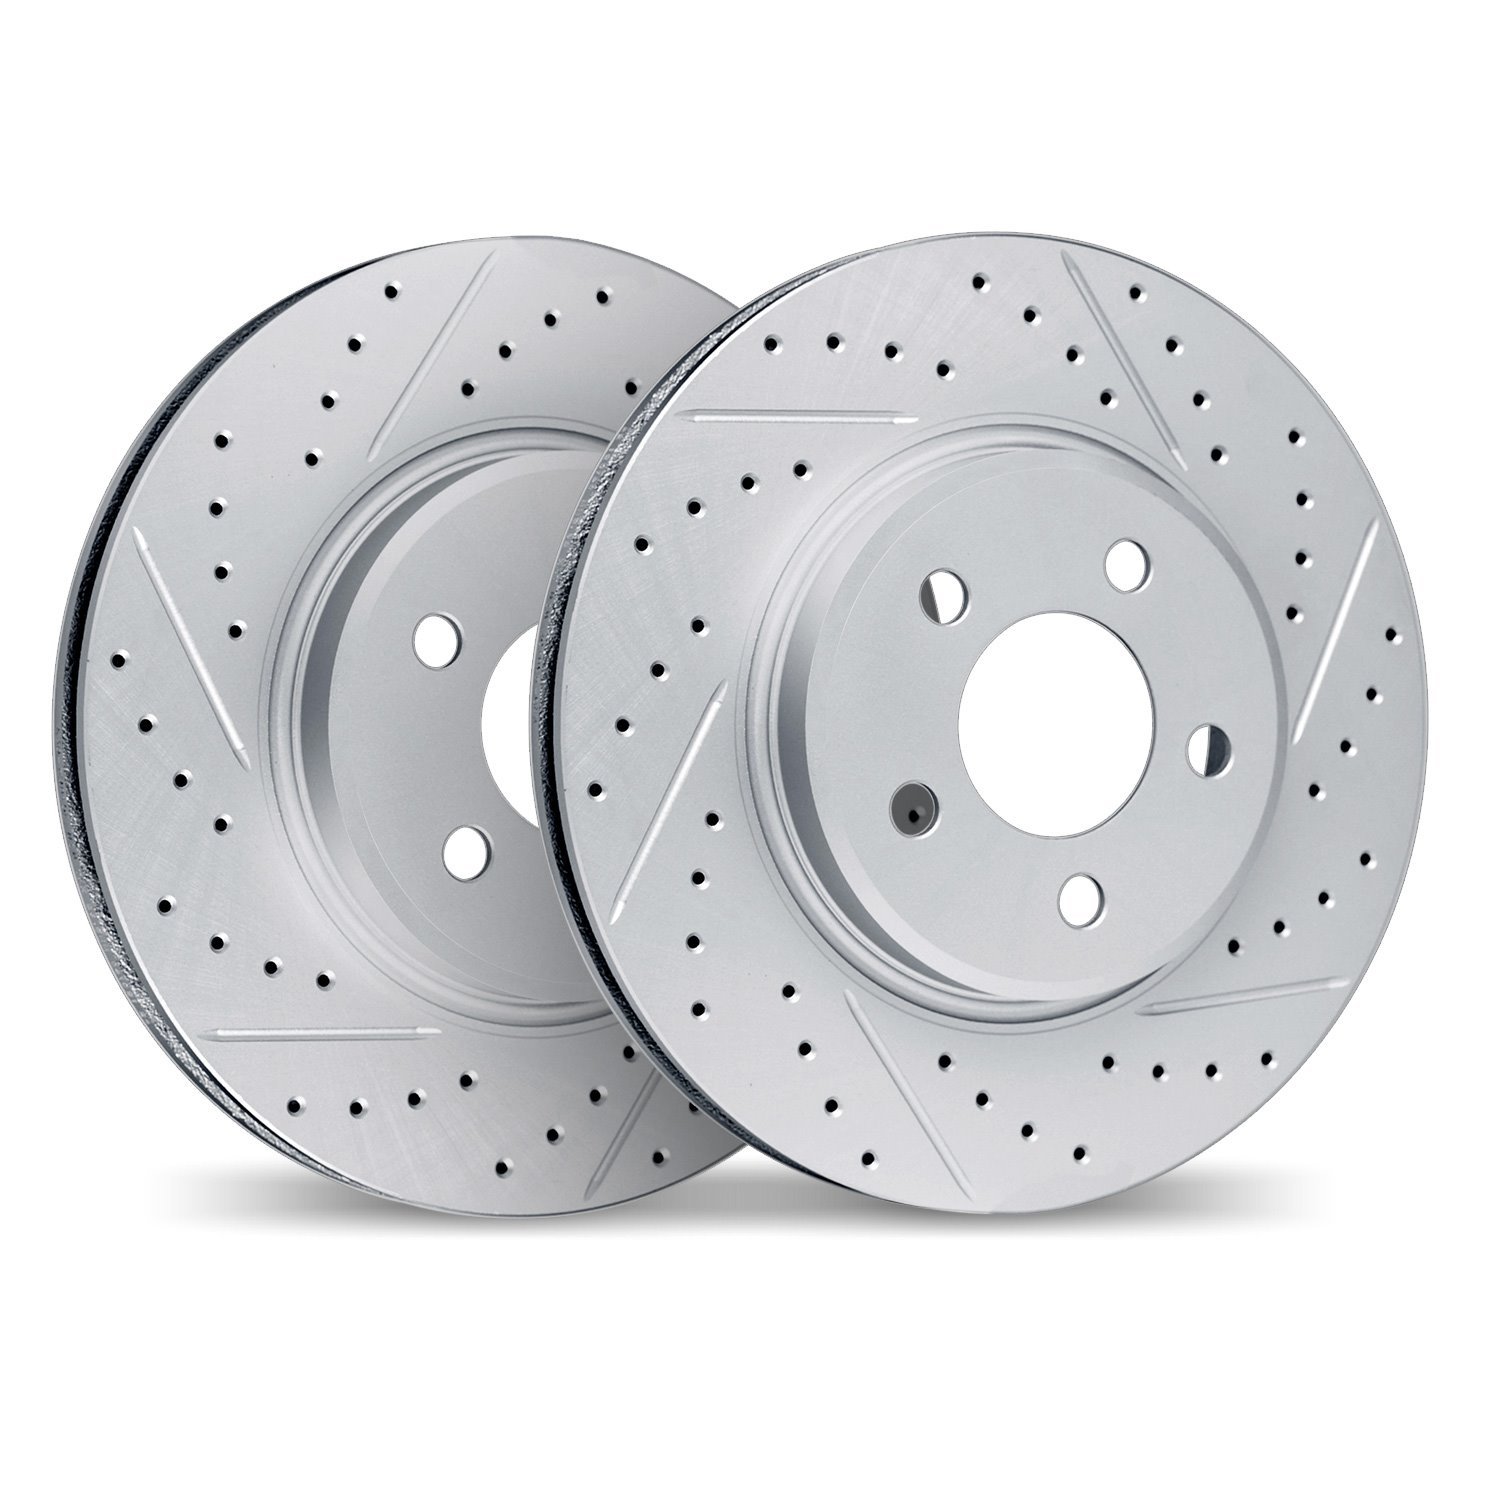 2002-31055 Geoperformance Drilled/Slotted Brake Rotors, 2008-2013 BMW, Position: Rear